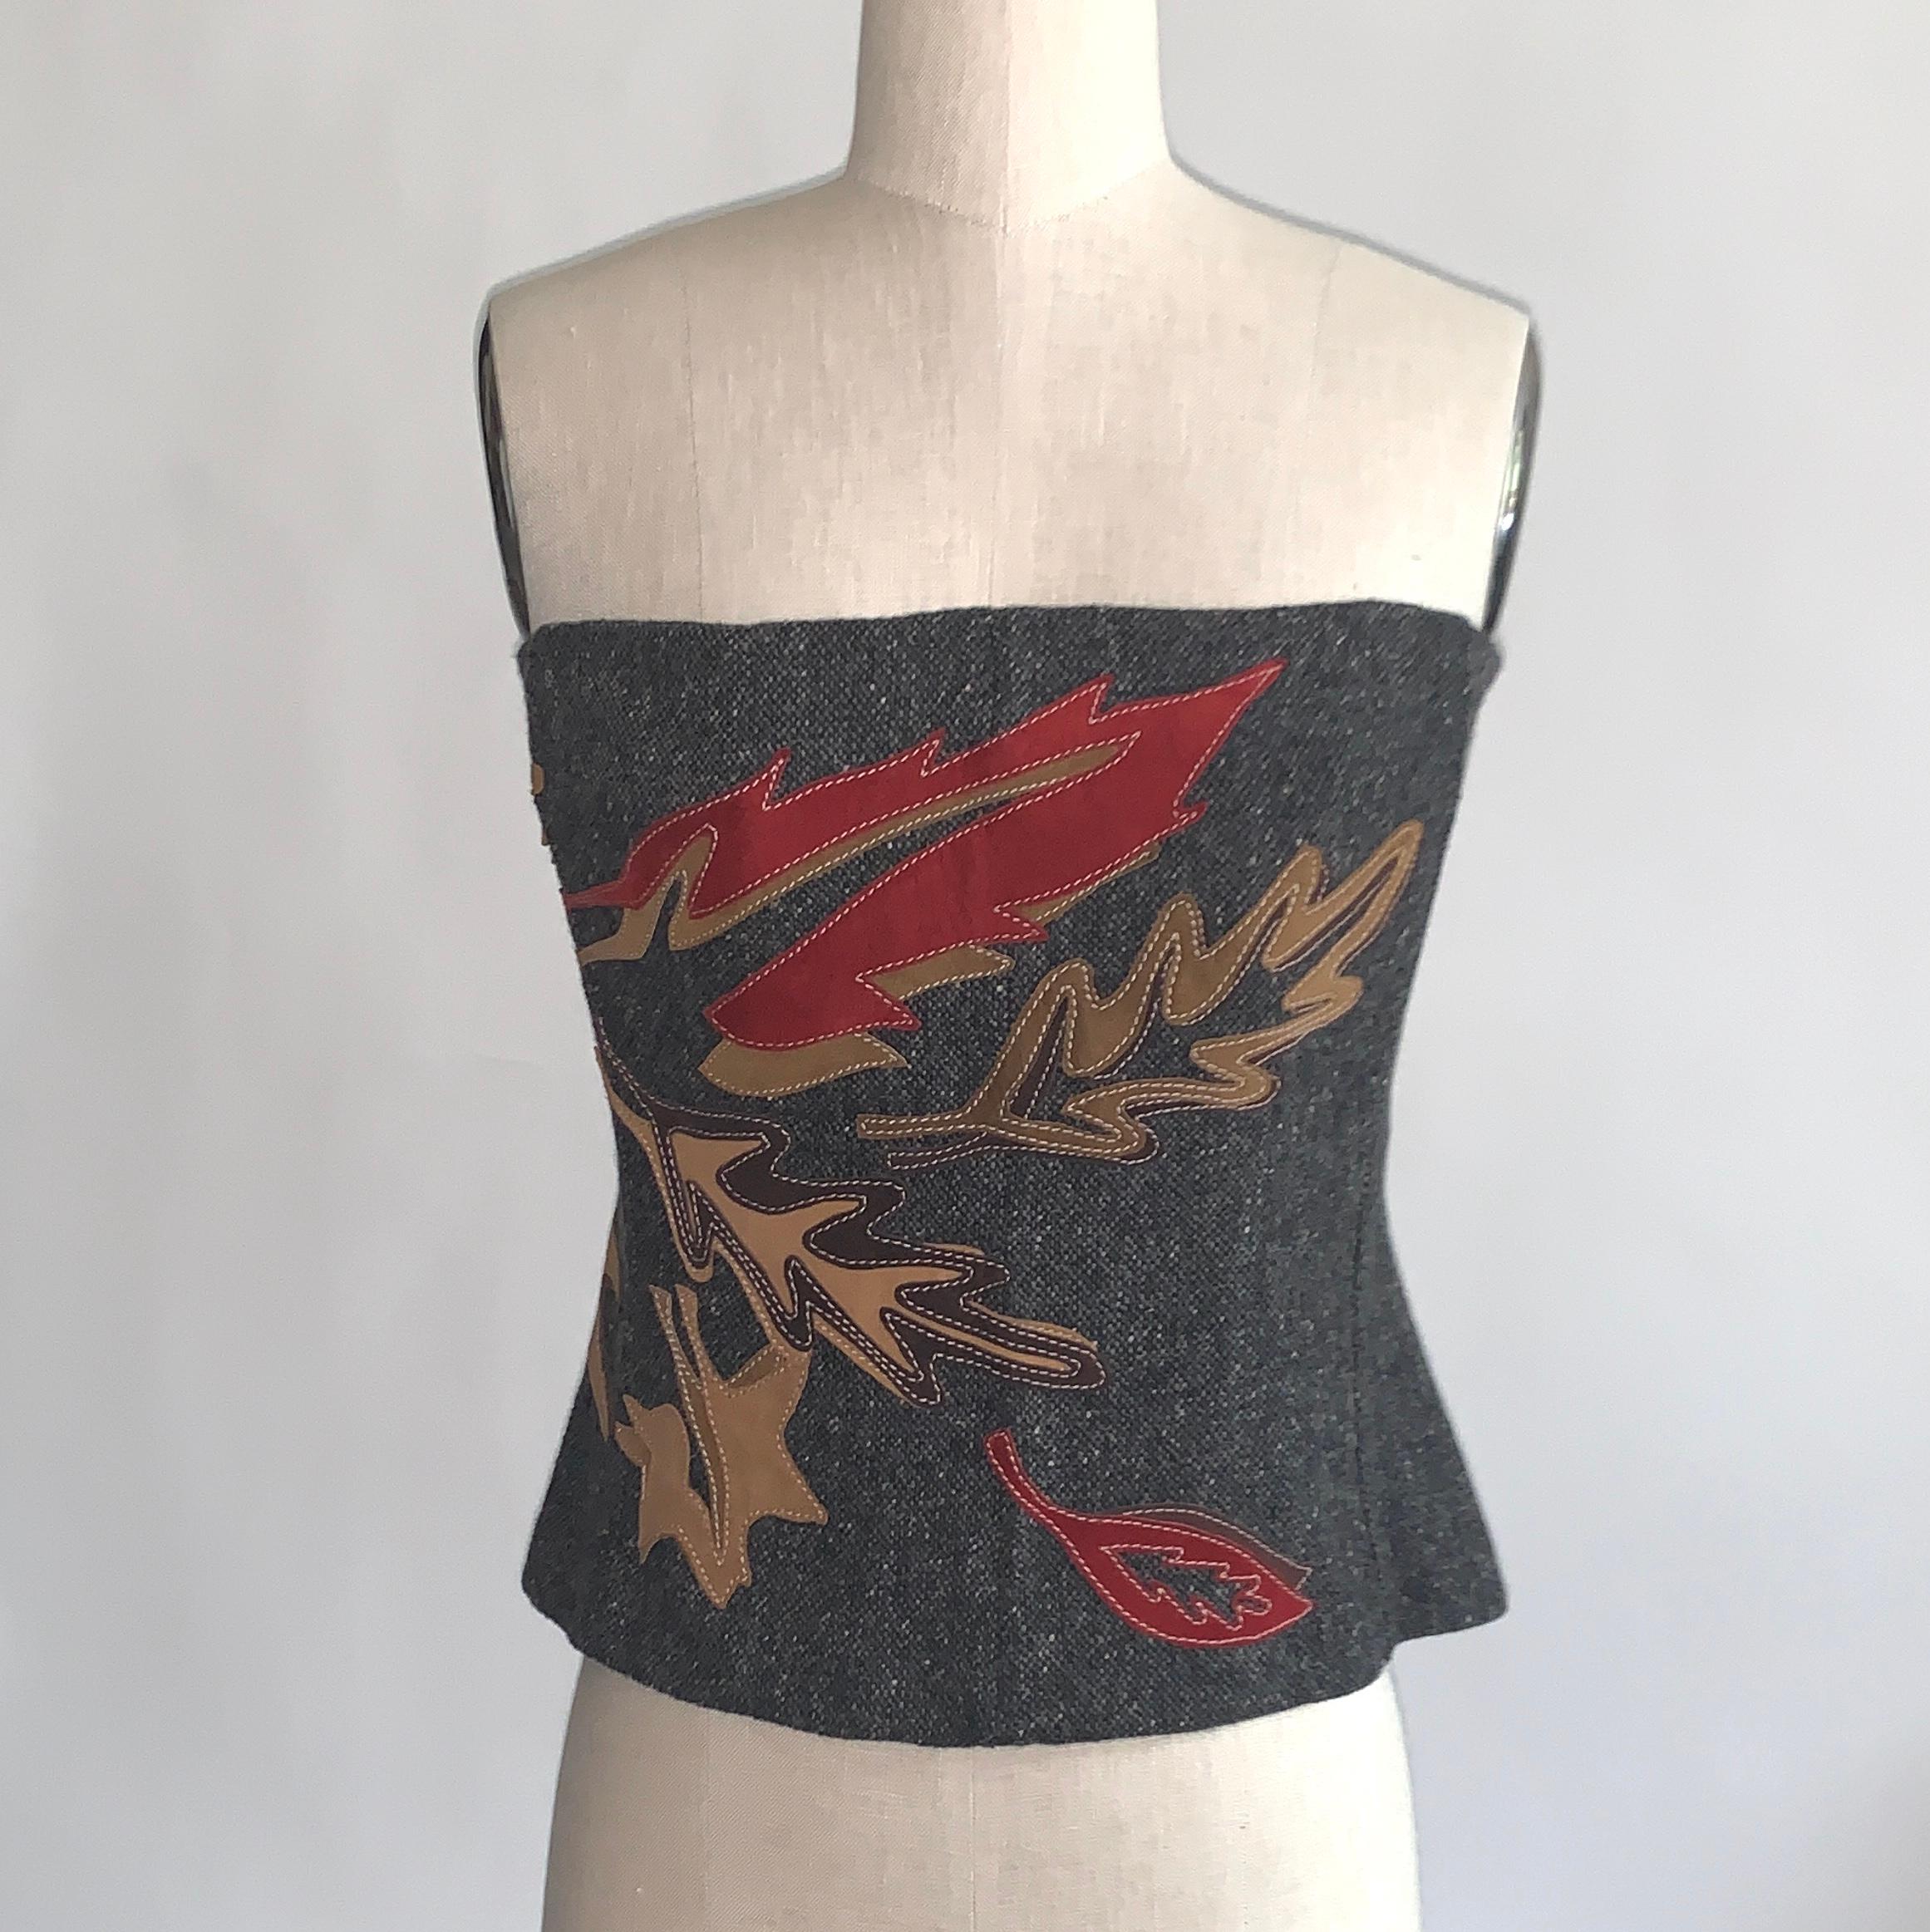 Dolce & Gabbana grey tweed strapless corset top in grey tweed with red and brown leather suede leaf appliqué at front and side. Boning at interior for shape and structure. Back zip and hook and eye. 

80% lambswool, 20% leather.
Fully lined in 56%